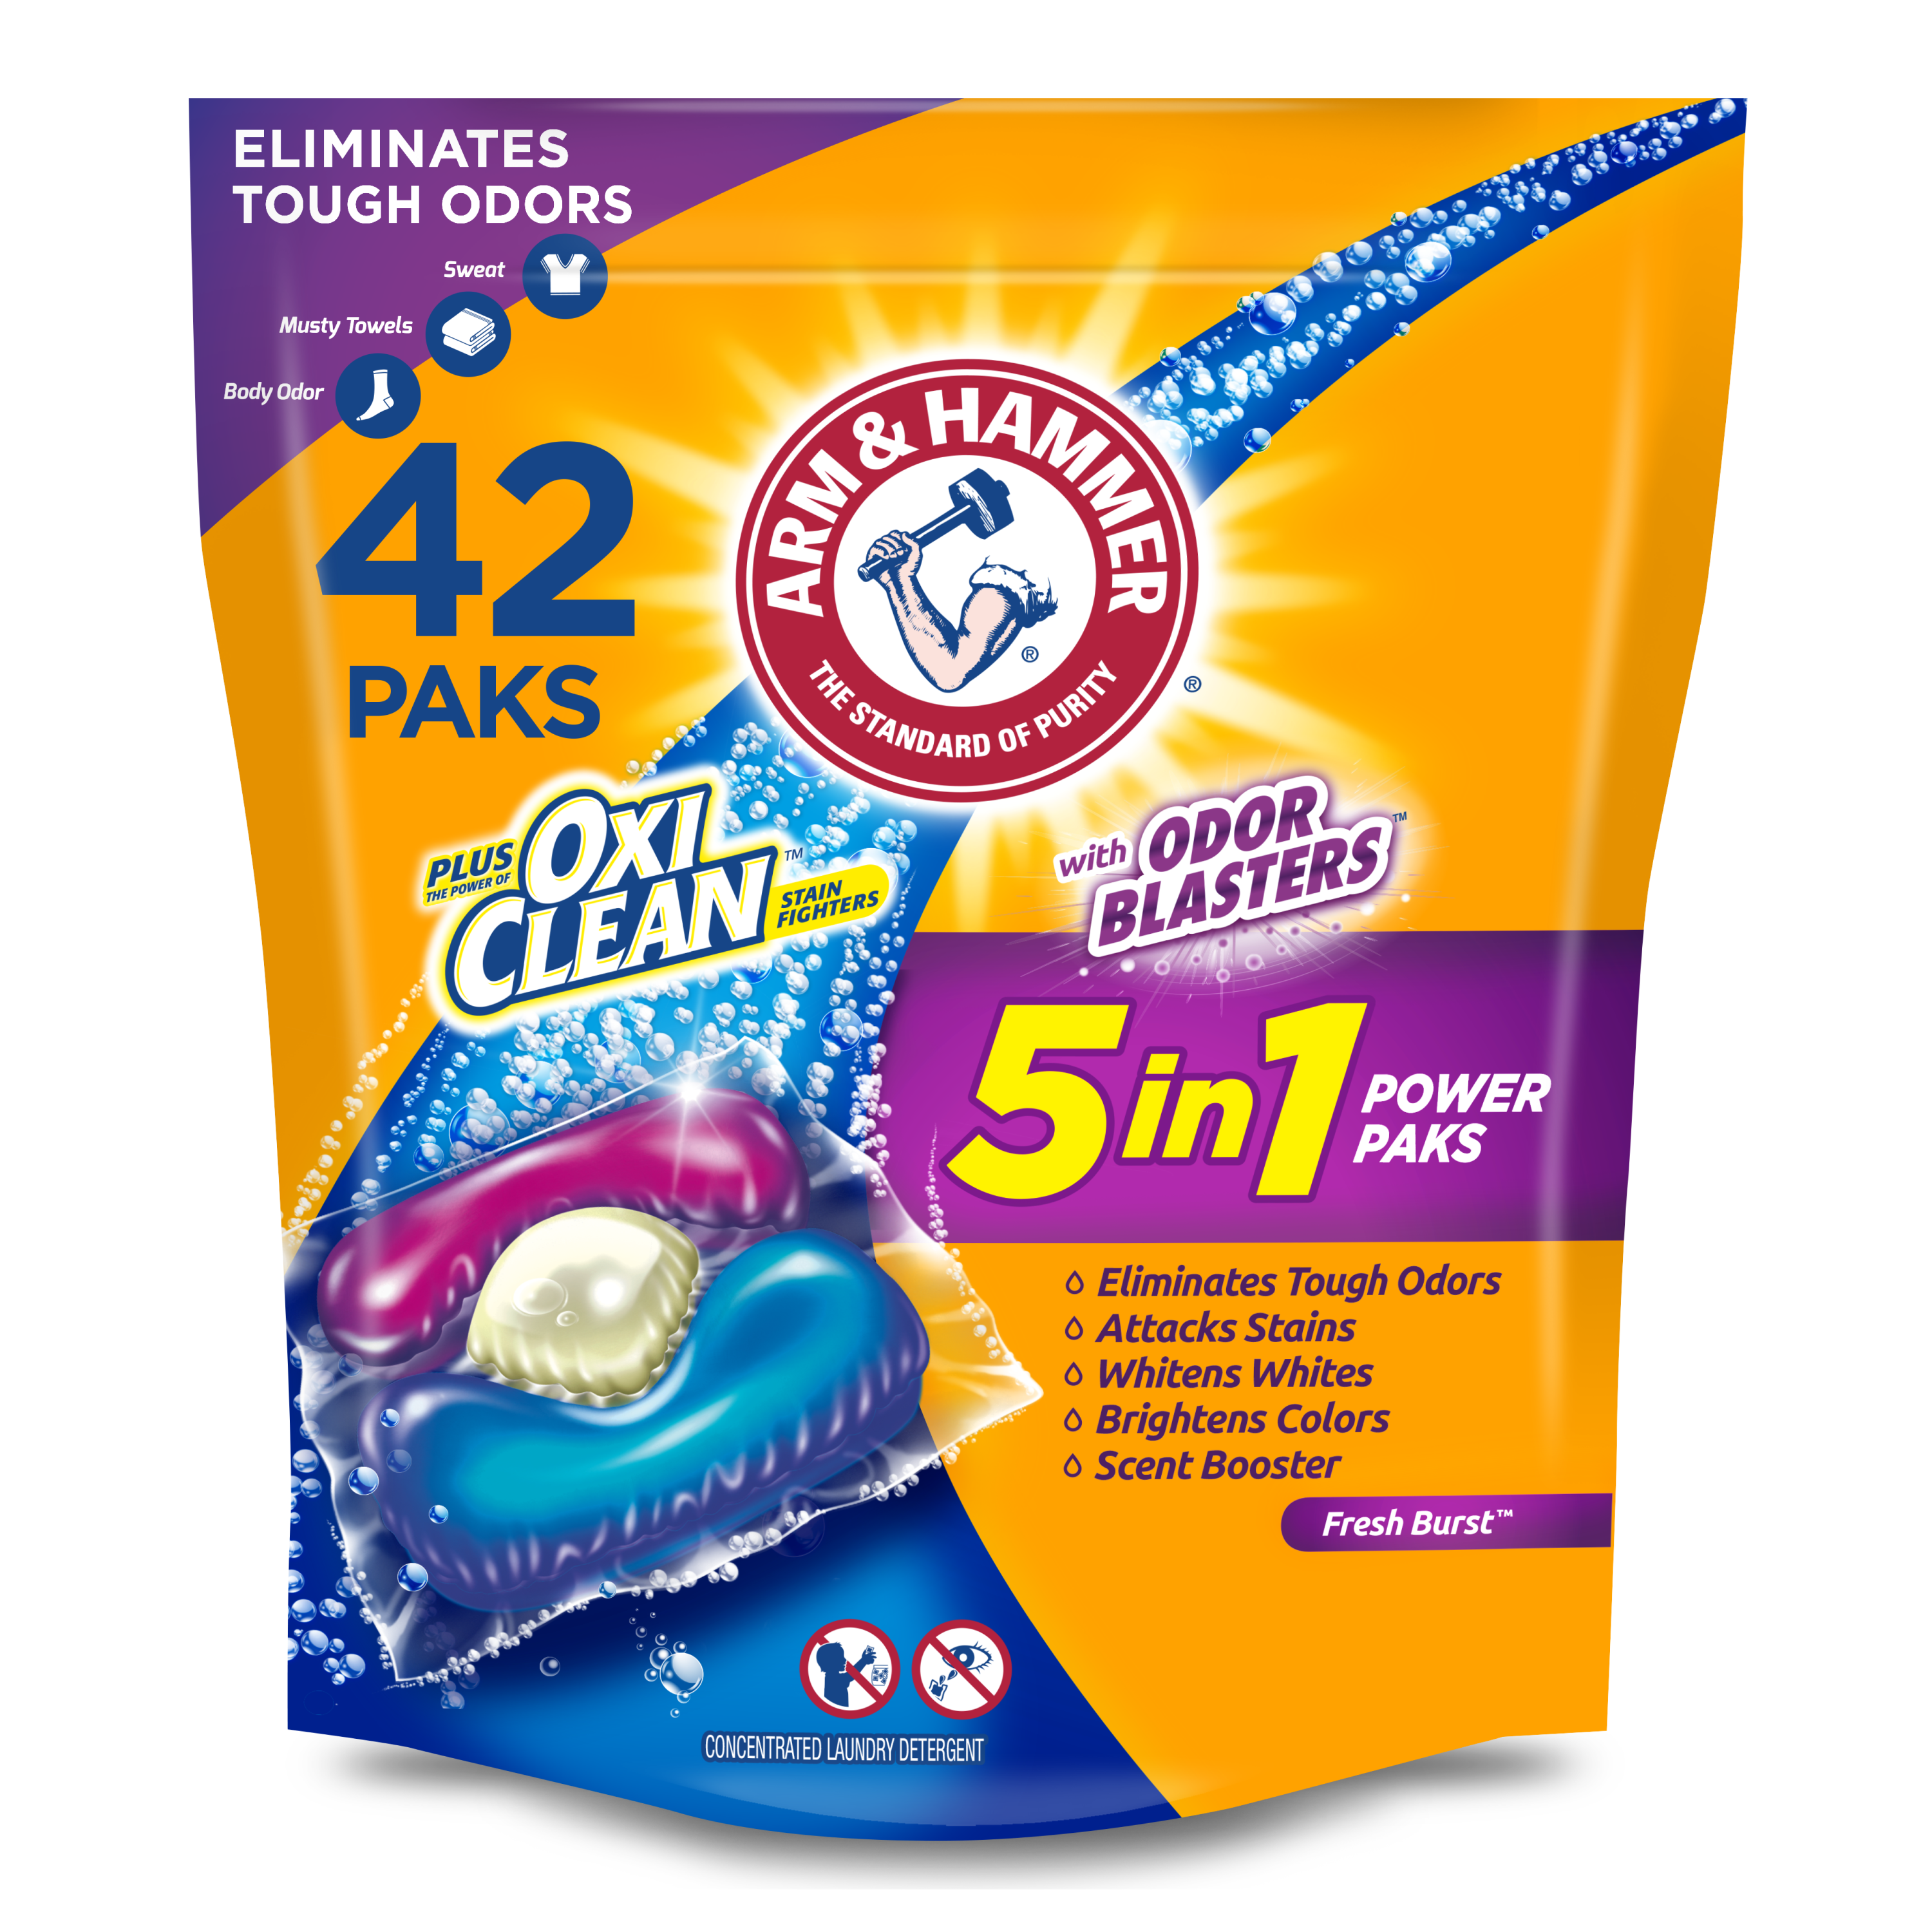 ARM & HAMMER Plus OxiClean with Odor Blasters 5-in-1 Fresh Burst Laundry Detergent Power Paks, 42 Count Bag - image 1 of 16